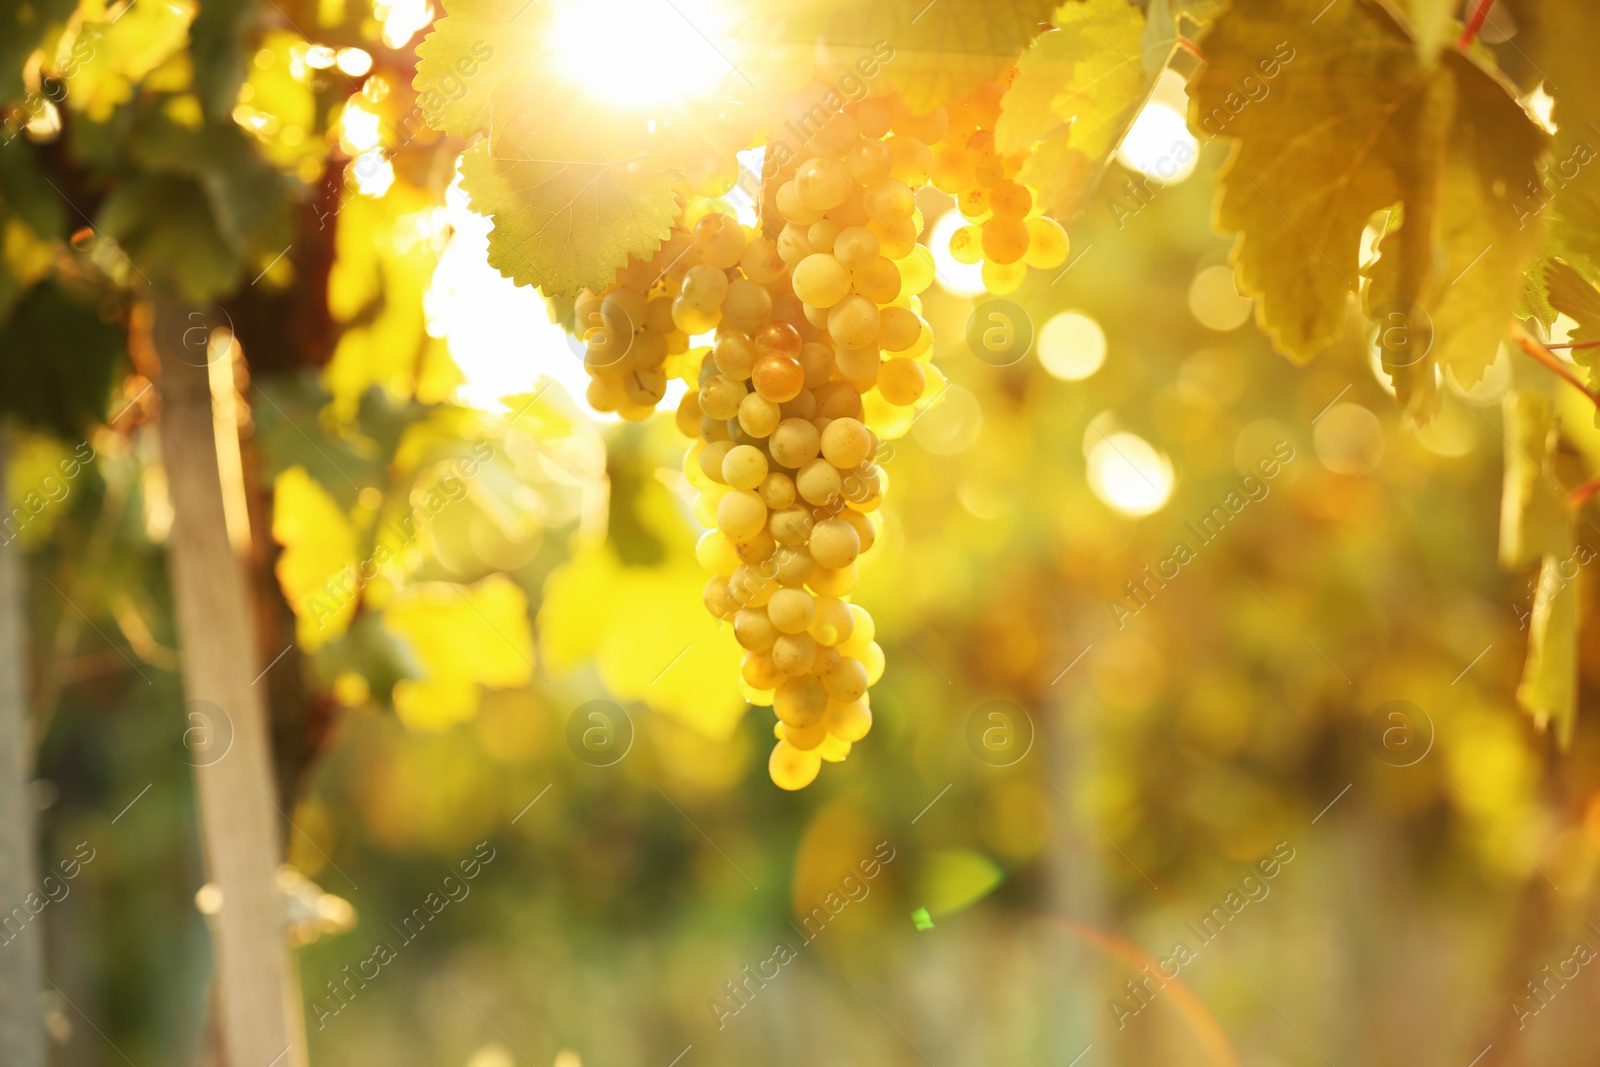 Photo of Bunch of fresh ripe juicy grapes against blurred background